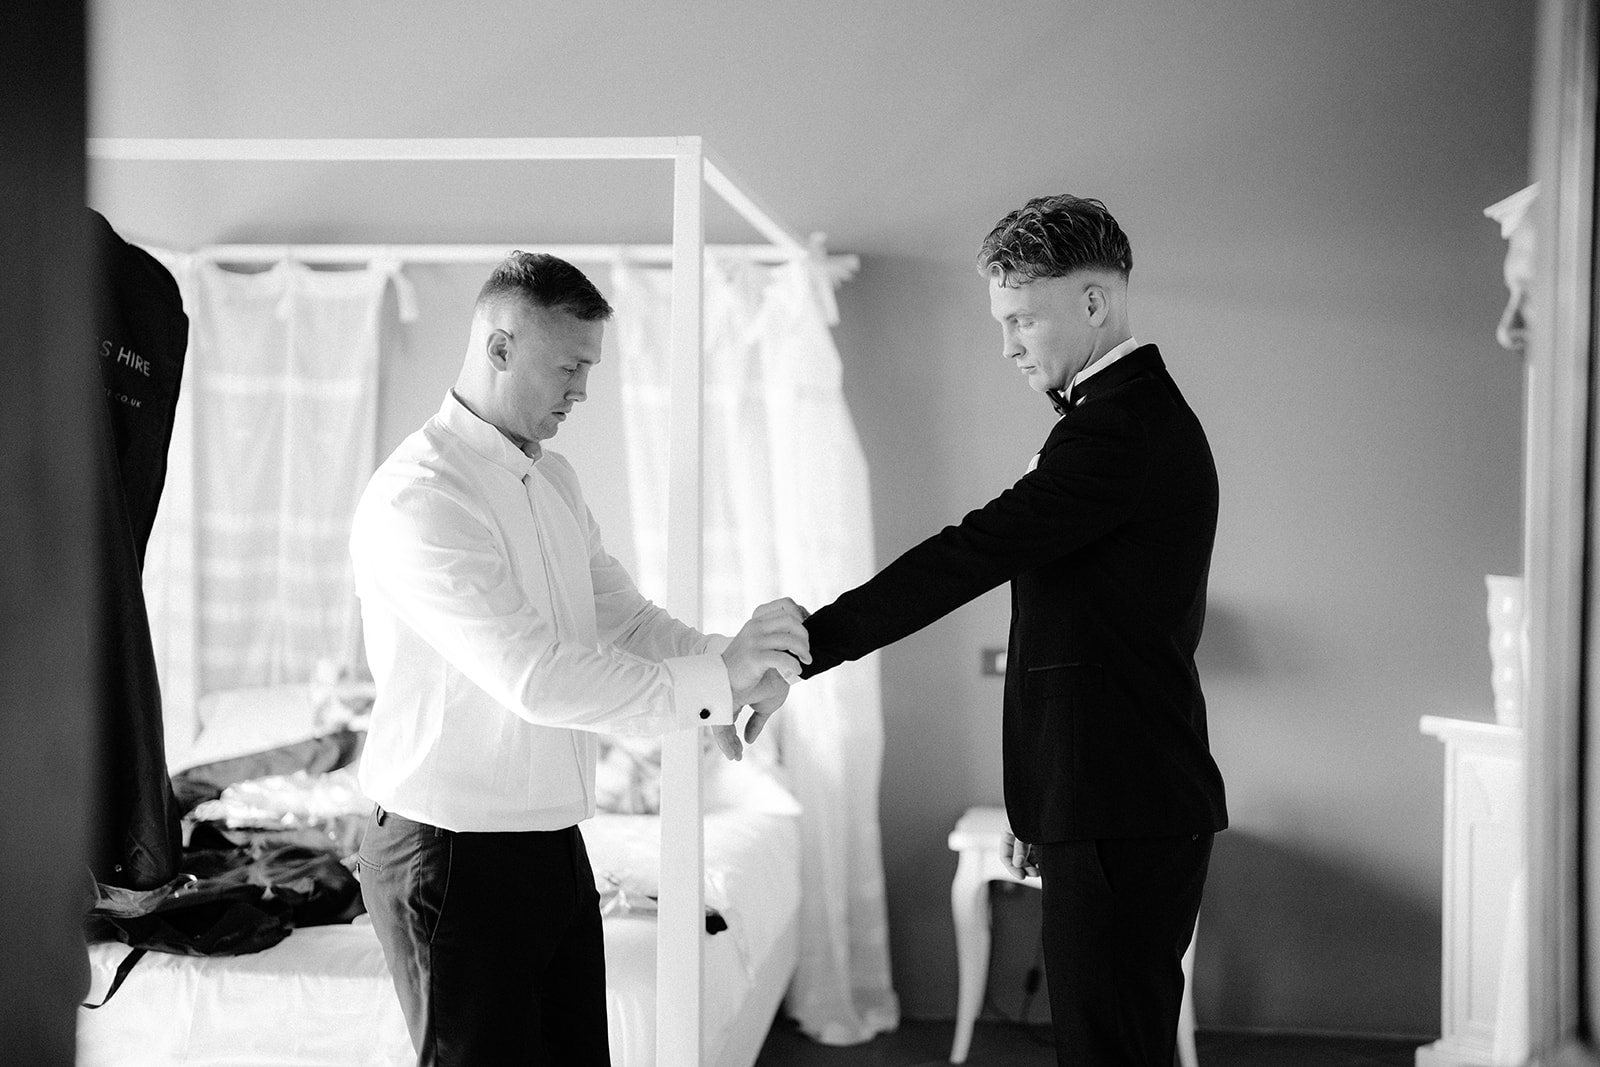 The best man is fixing the groom's cuffs